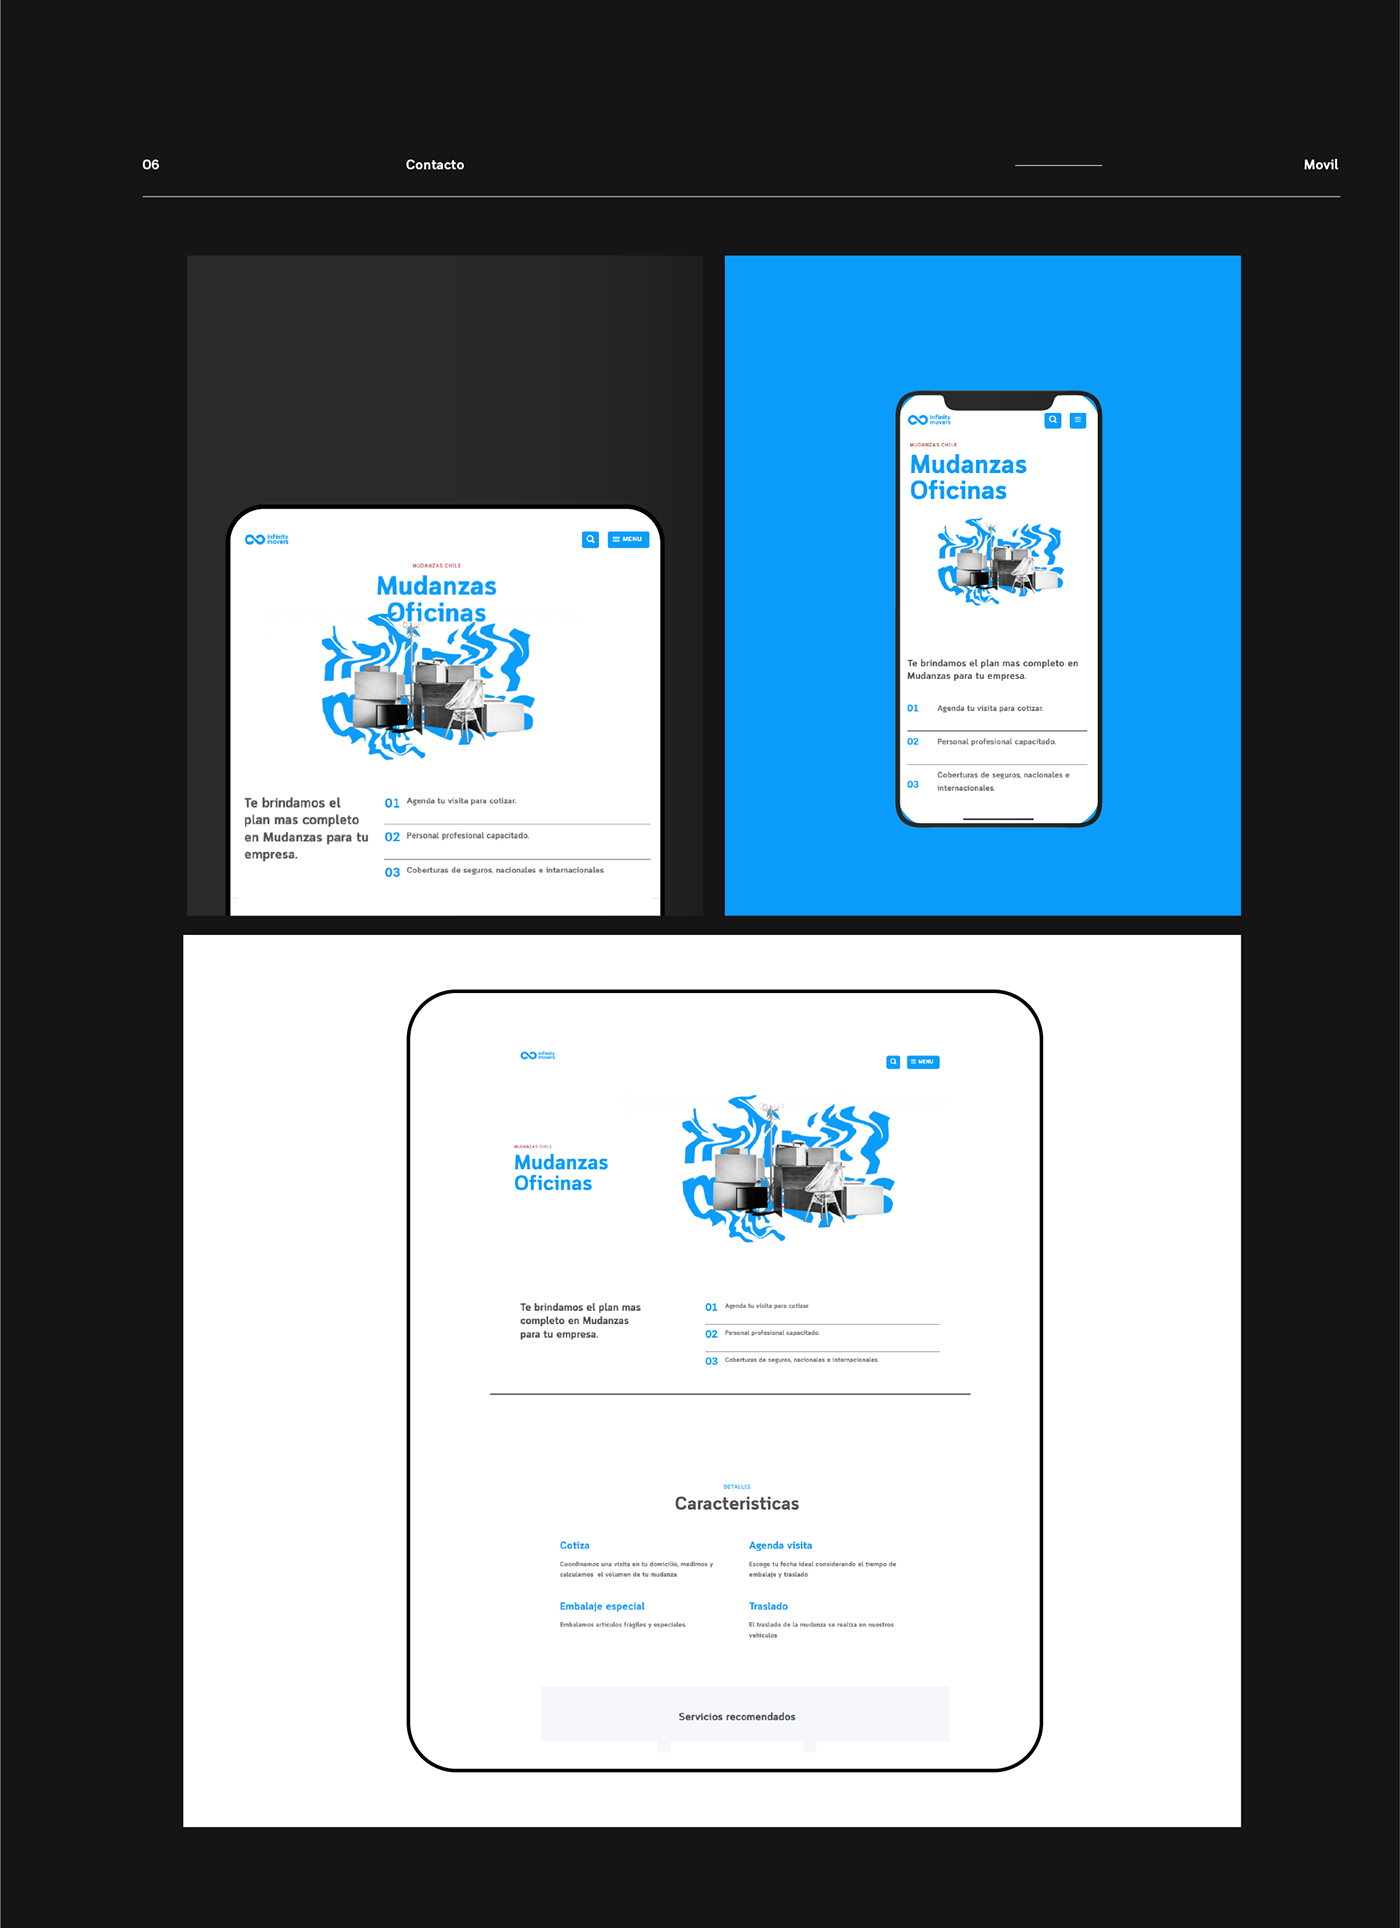 design gráfico infinity movers movers moving company mudanzas UI/UX user interface Web Design  Website wordpress